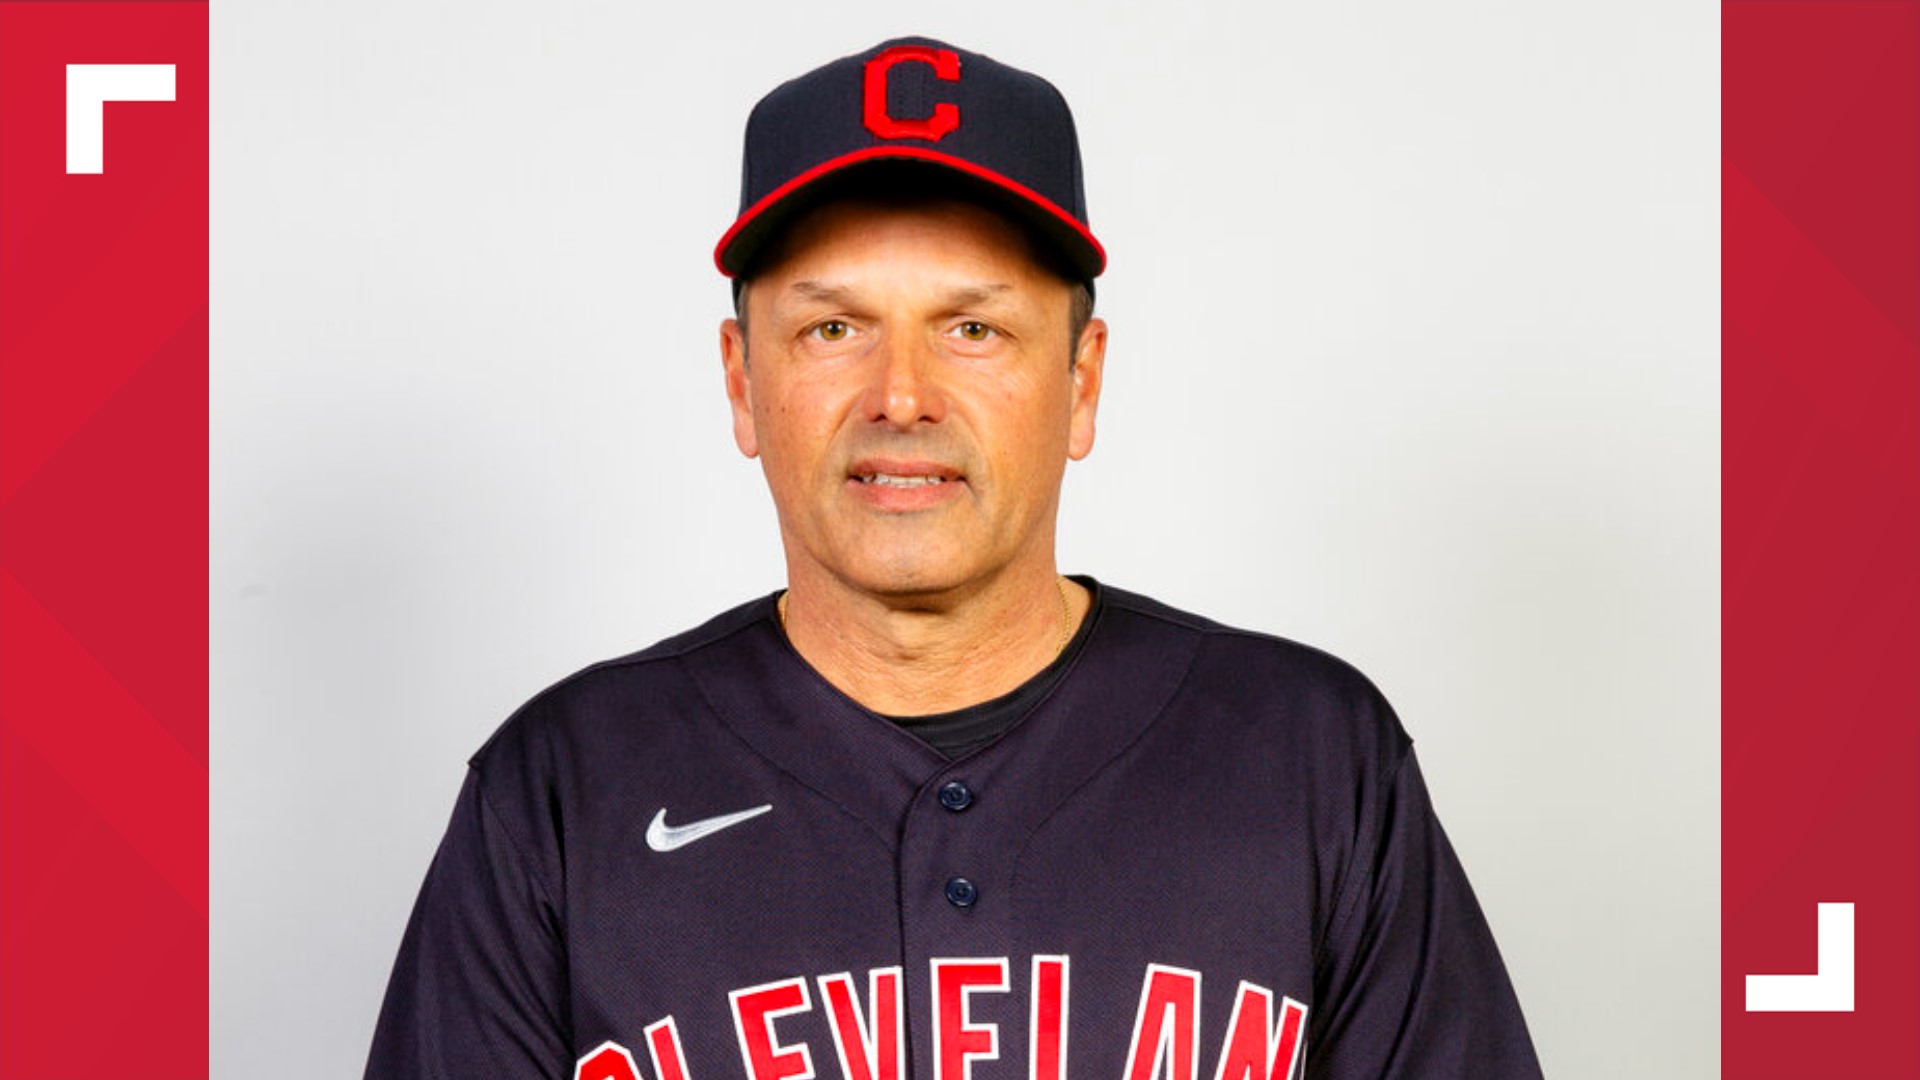 We go 'Beyond the Dugout' for a special interview with Cleveland Indians' third base coach Mike Sarbaugh in which he reveals a funny story about Terry Francona.